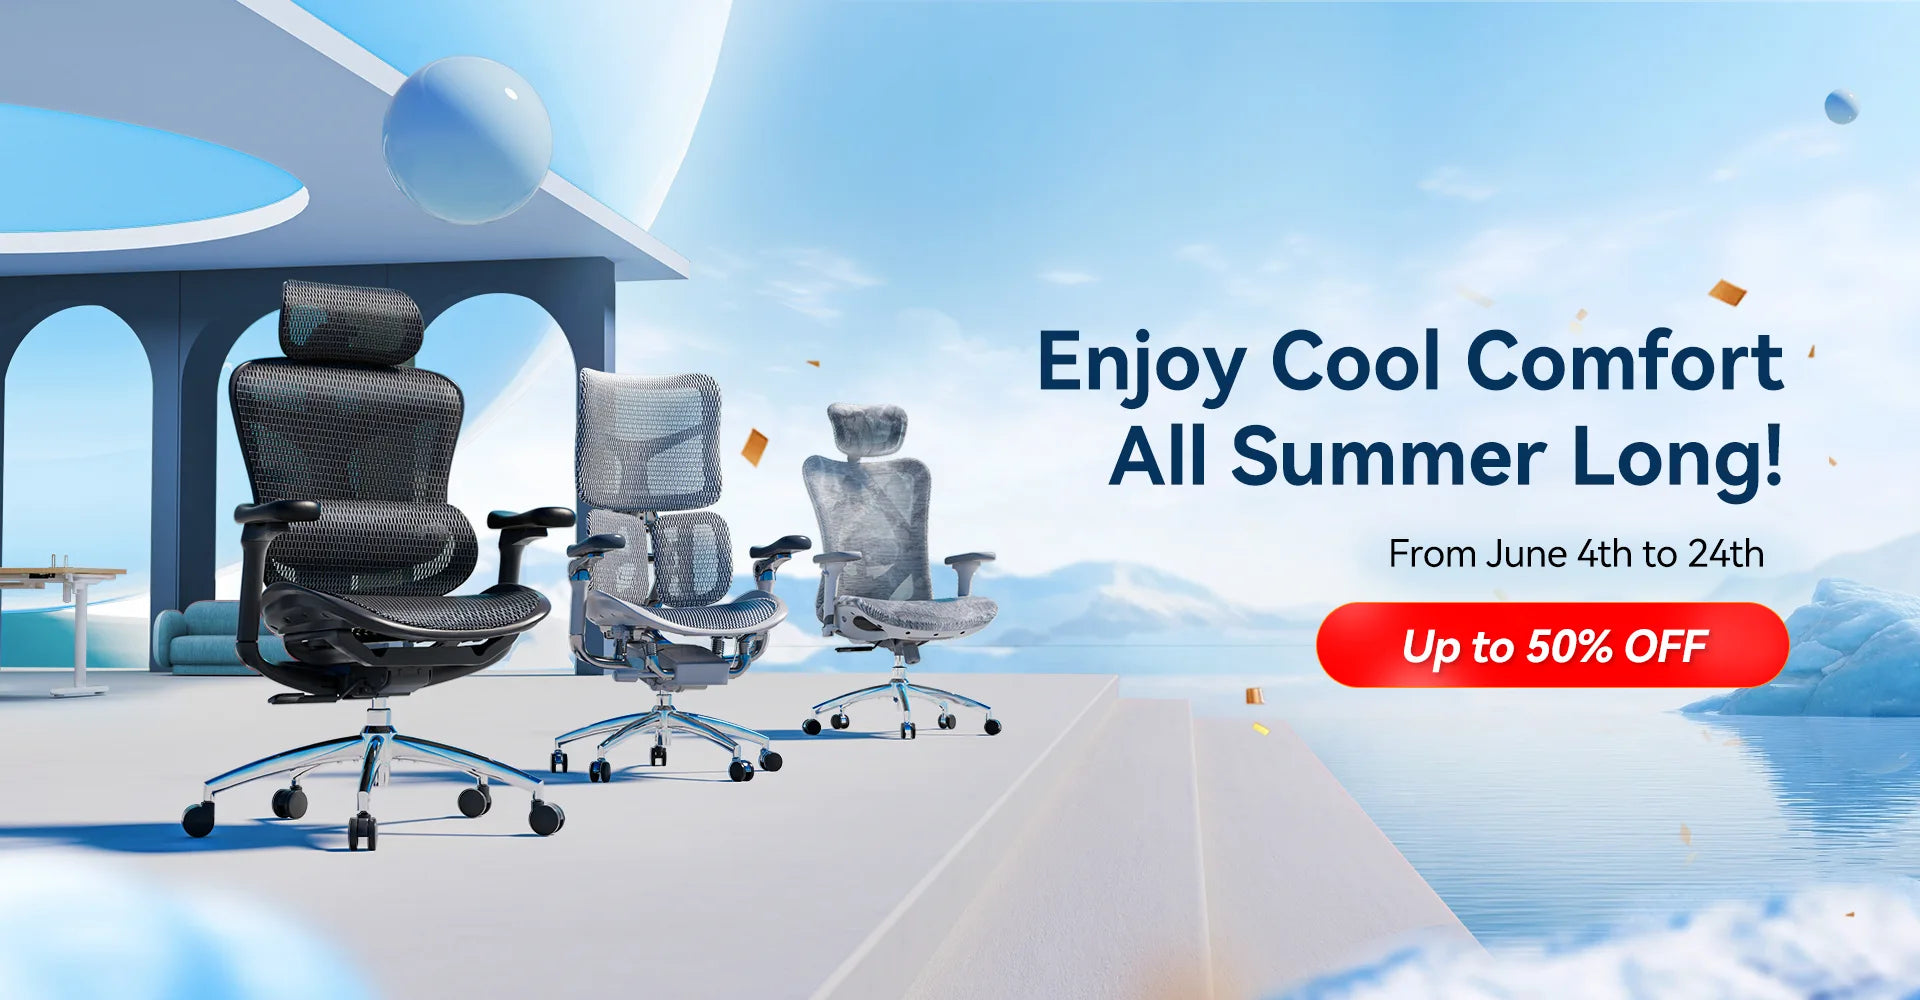 Beat the Heat with Our Summer Sale! Up to 50% OFF Sihoo Chairs!